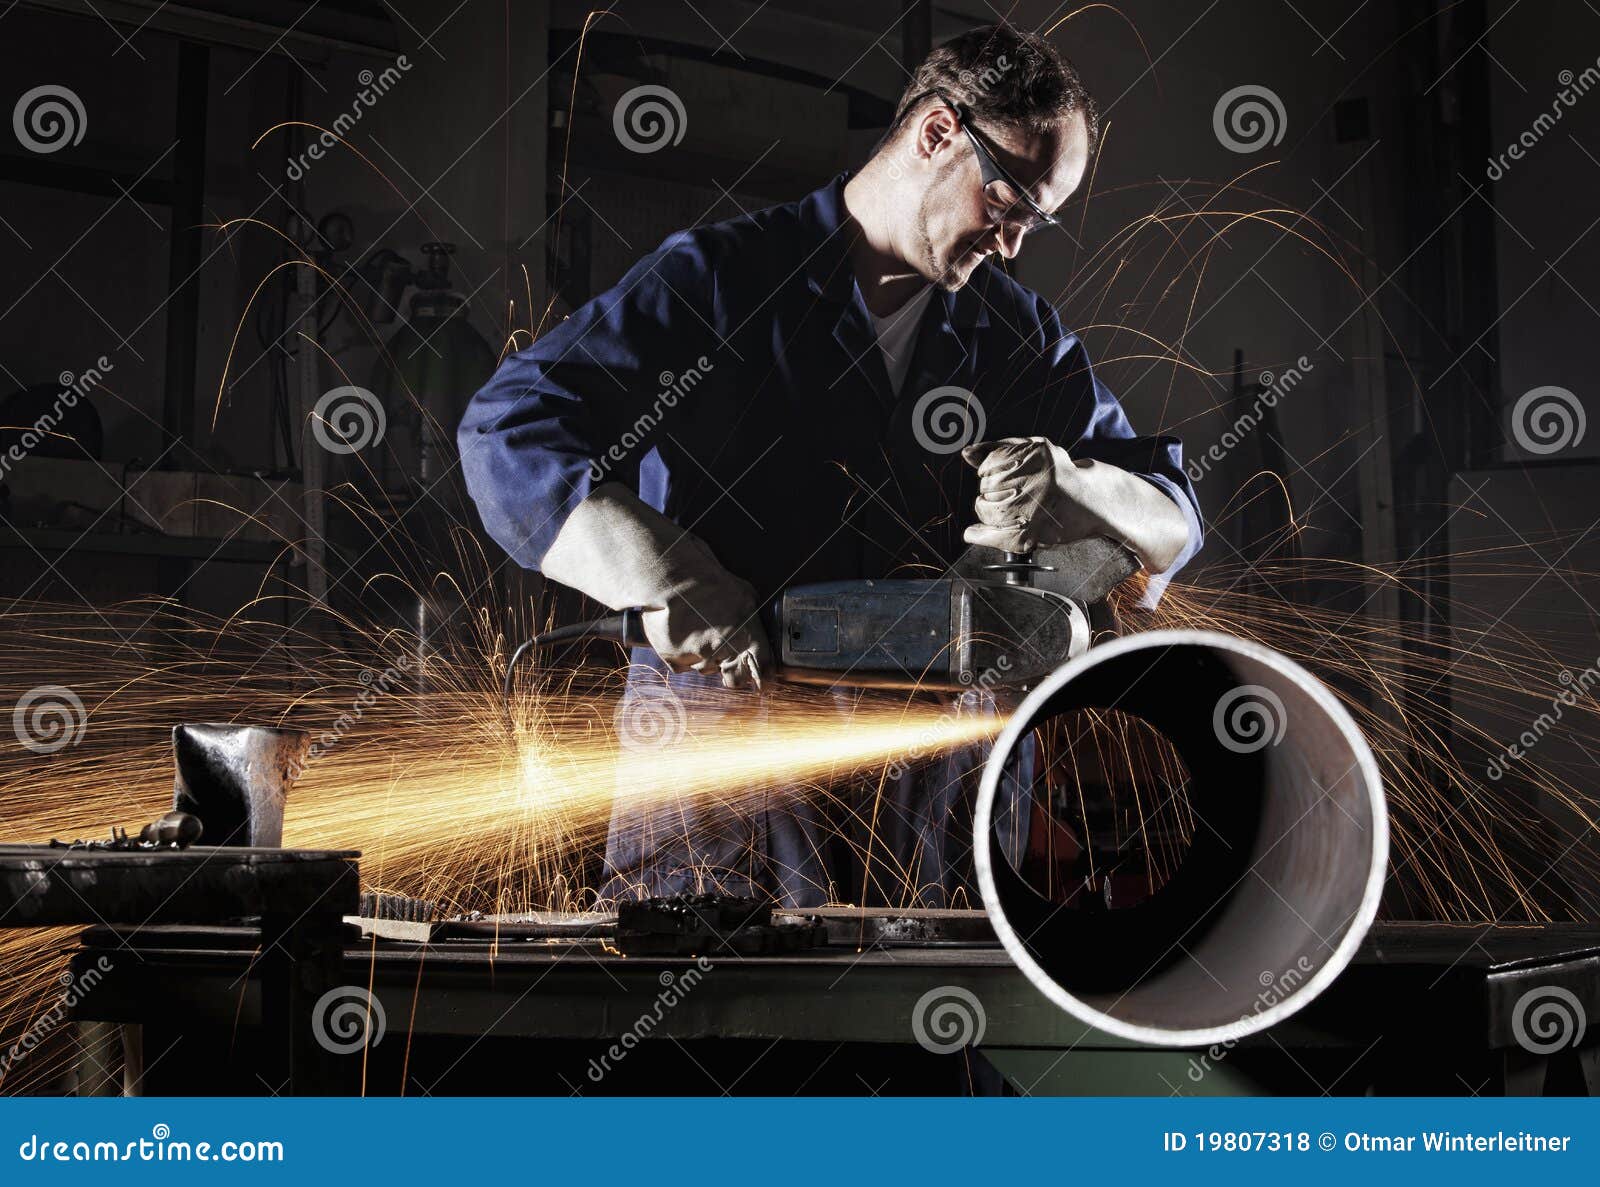 worker cutting pipe with angle grinder.